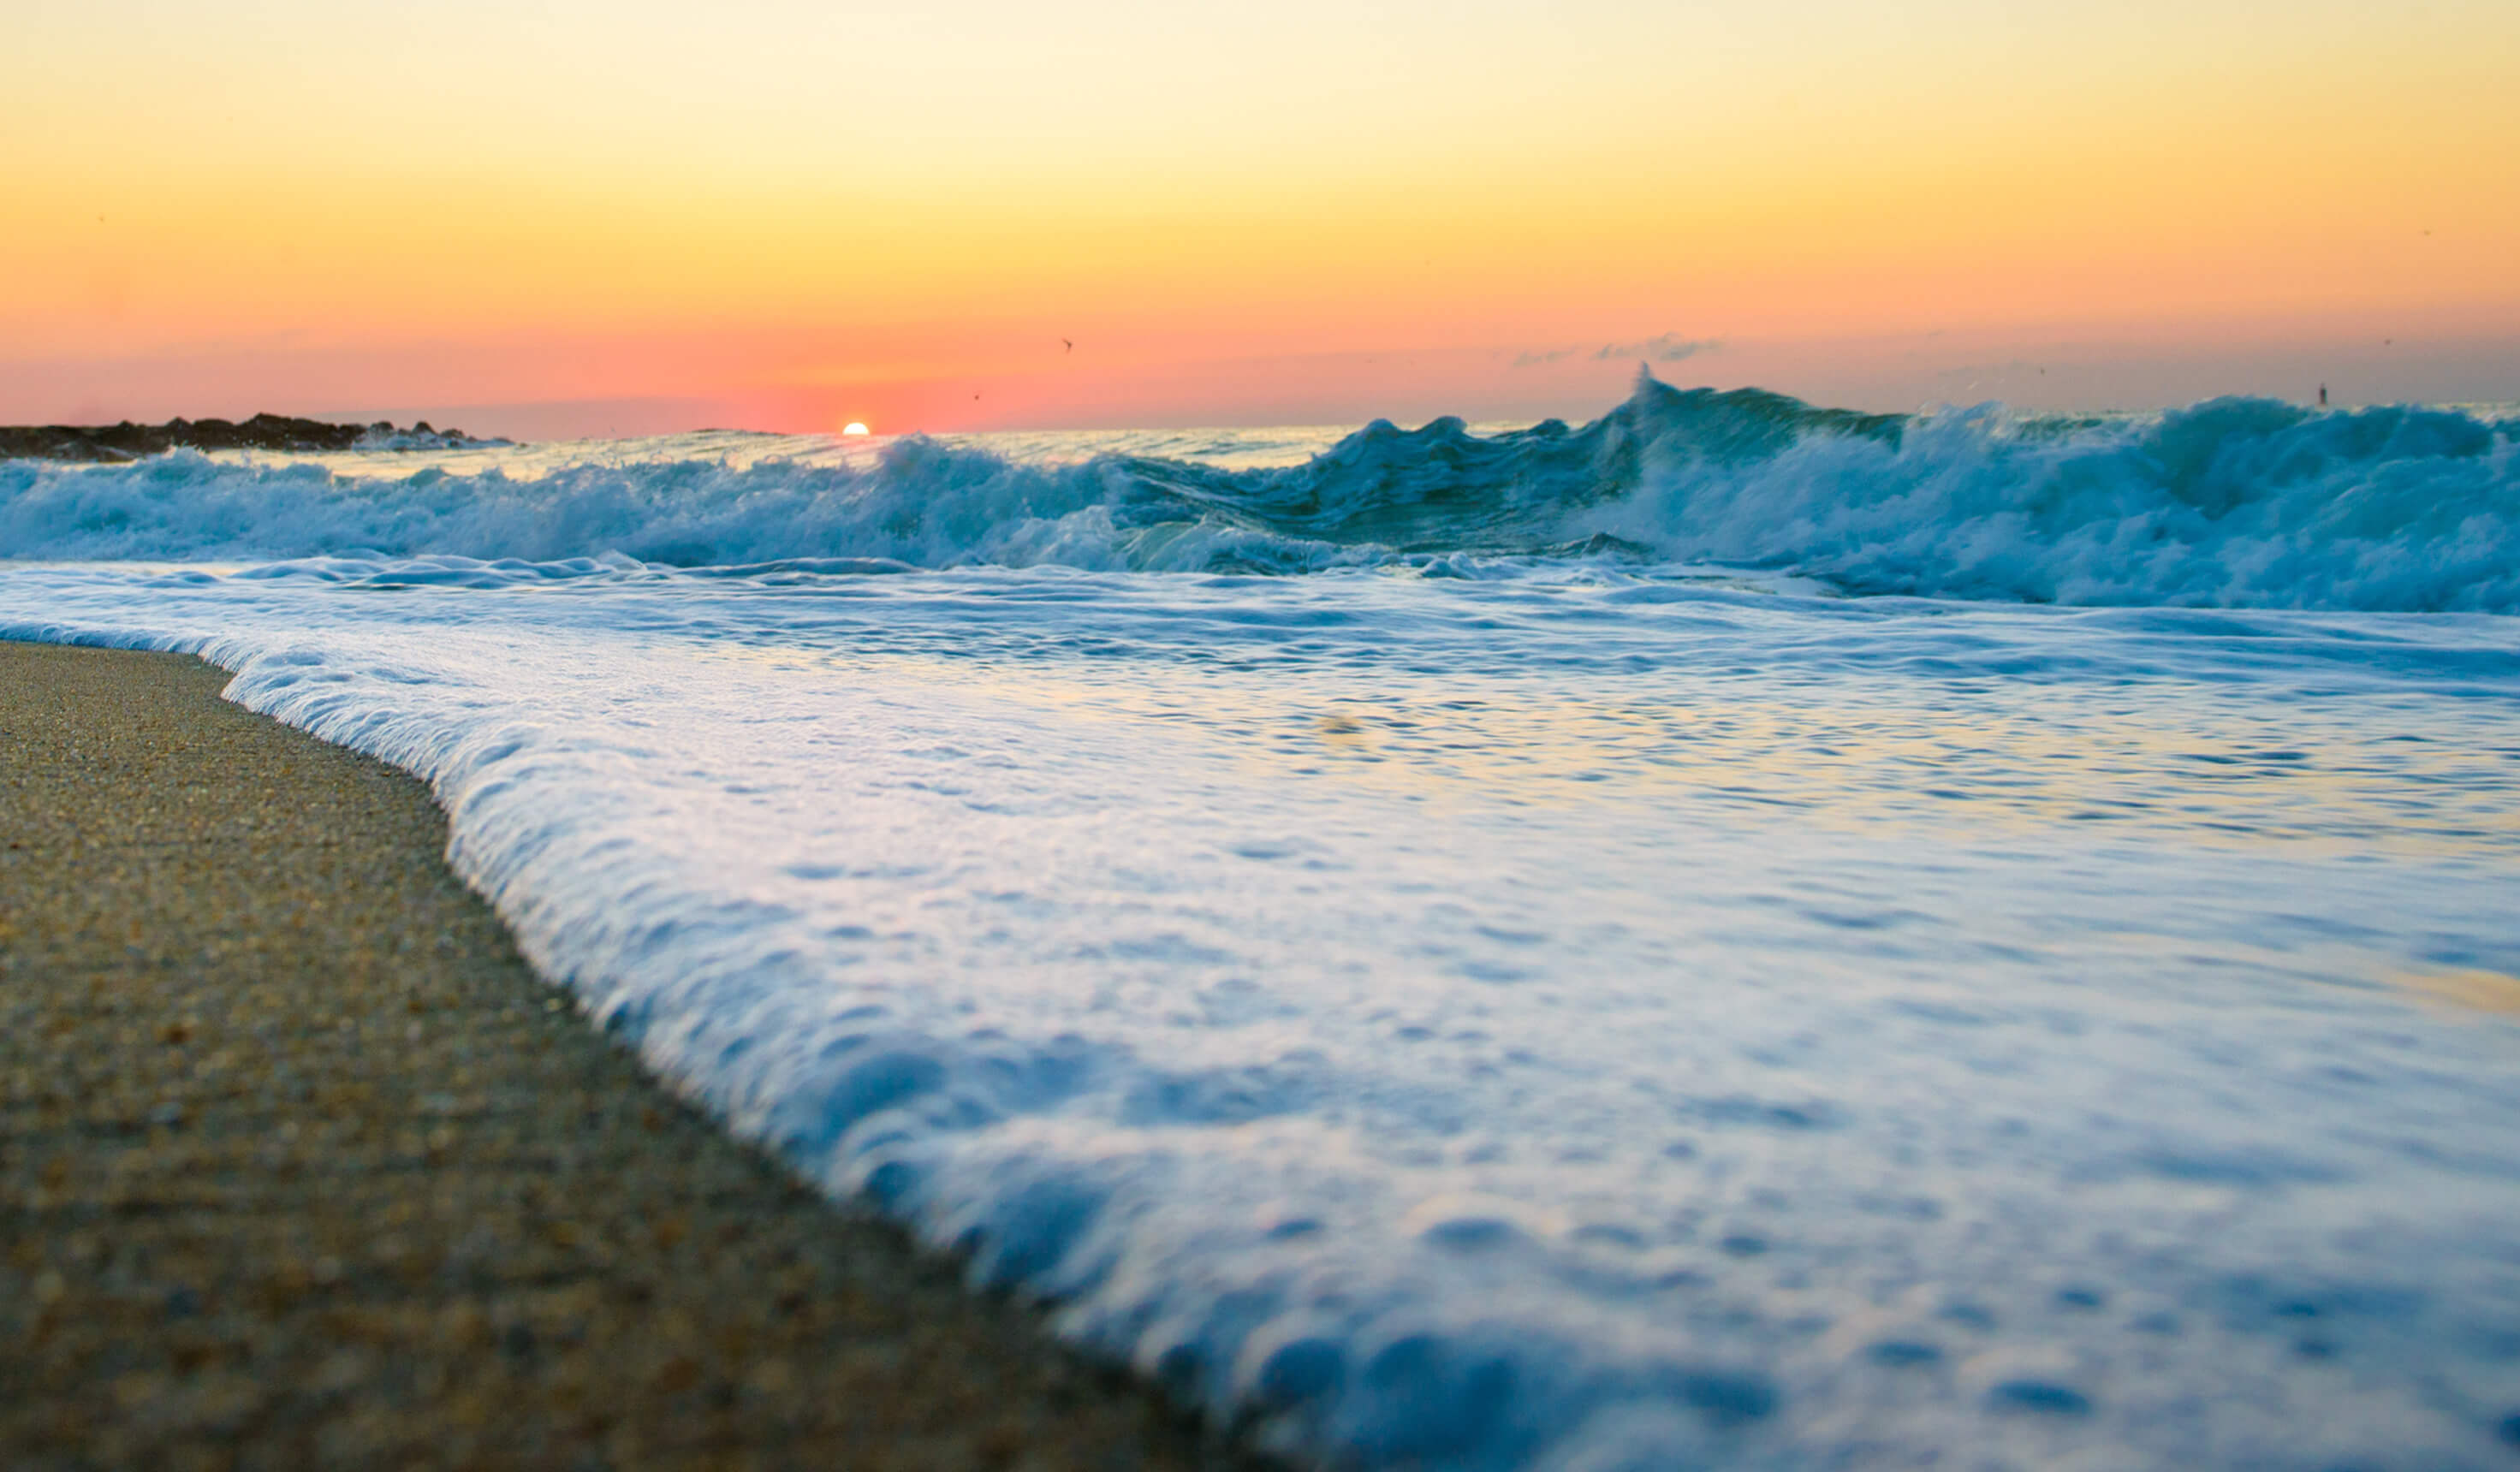 Picture of a small wave washing on the beach, sunrise in the background.